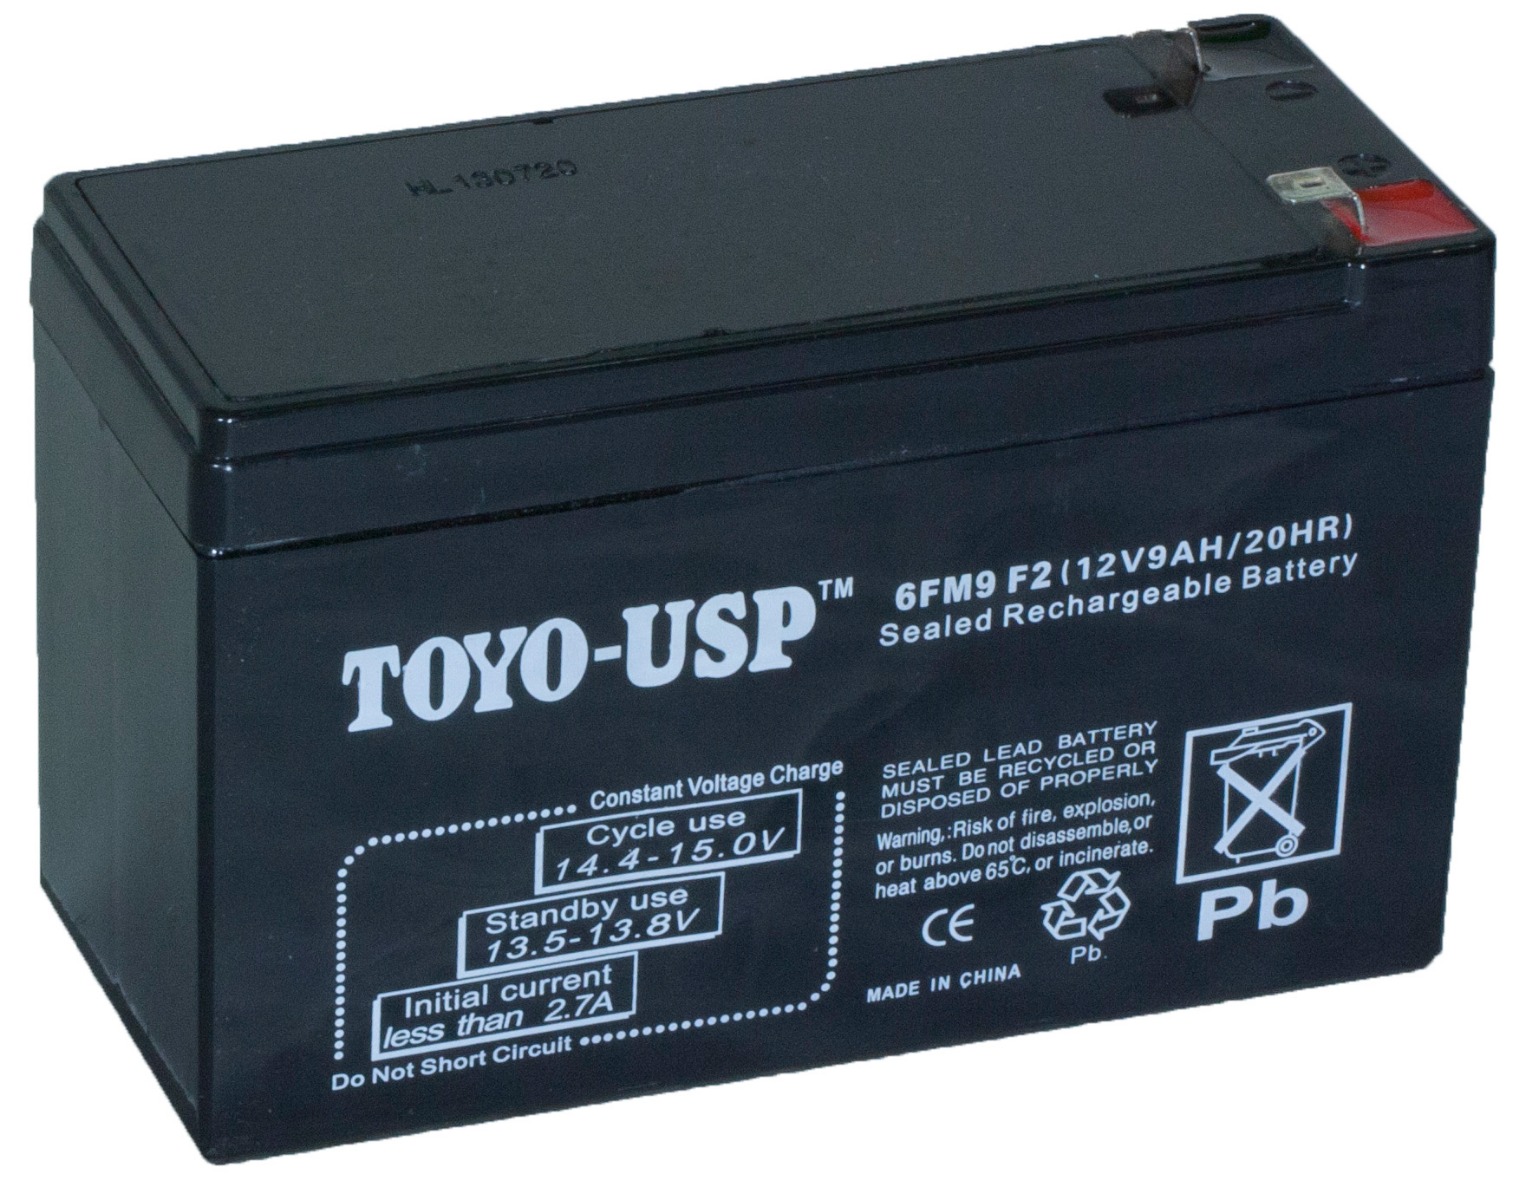 TOYO Sealed Lead Acid Battery 12V 9AH (6FM9) (Call To Order)